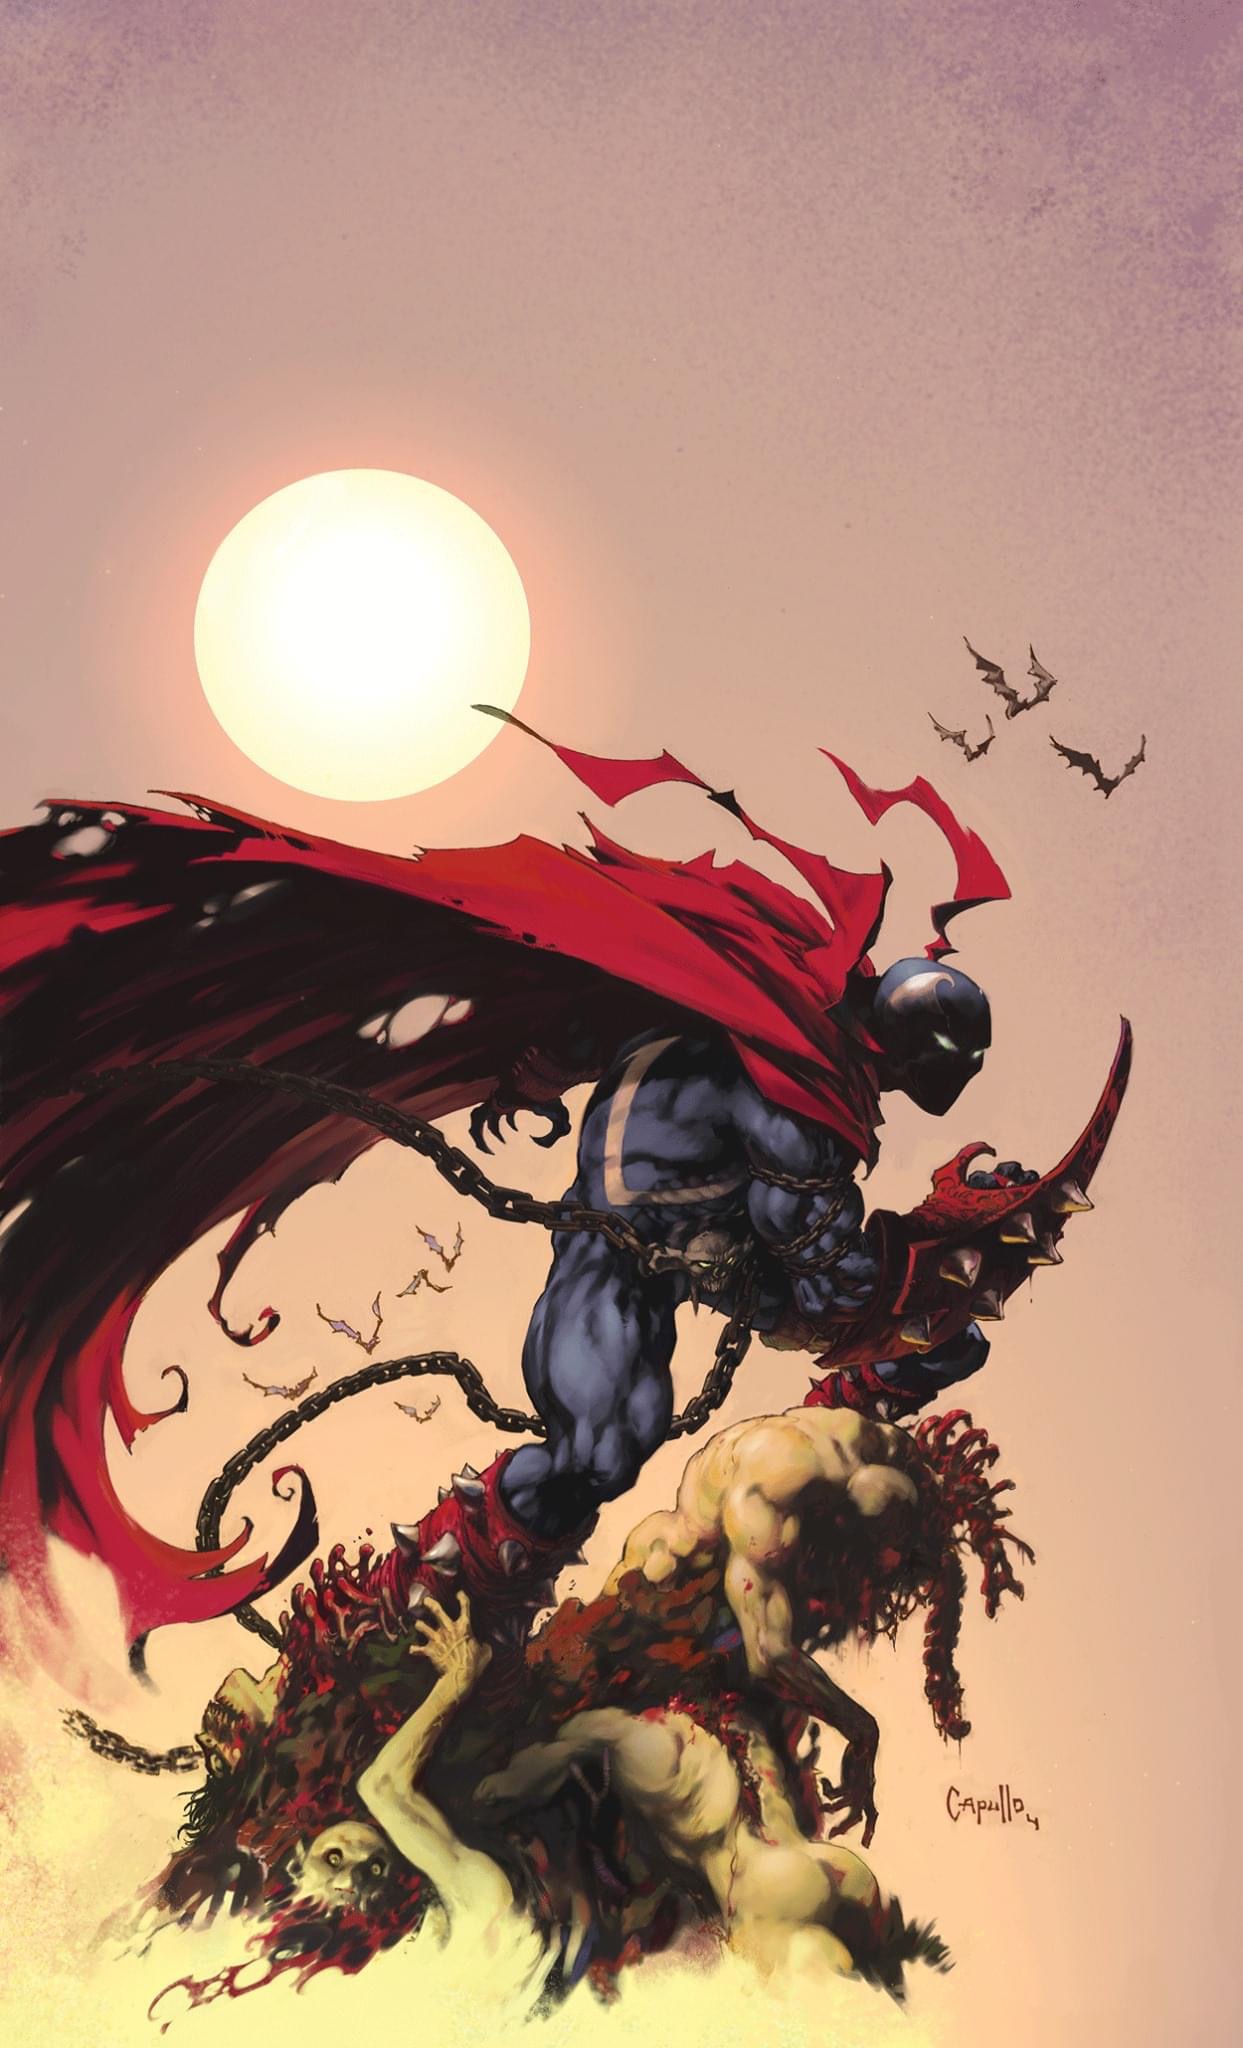 The Art of Spawn - you Creple,